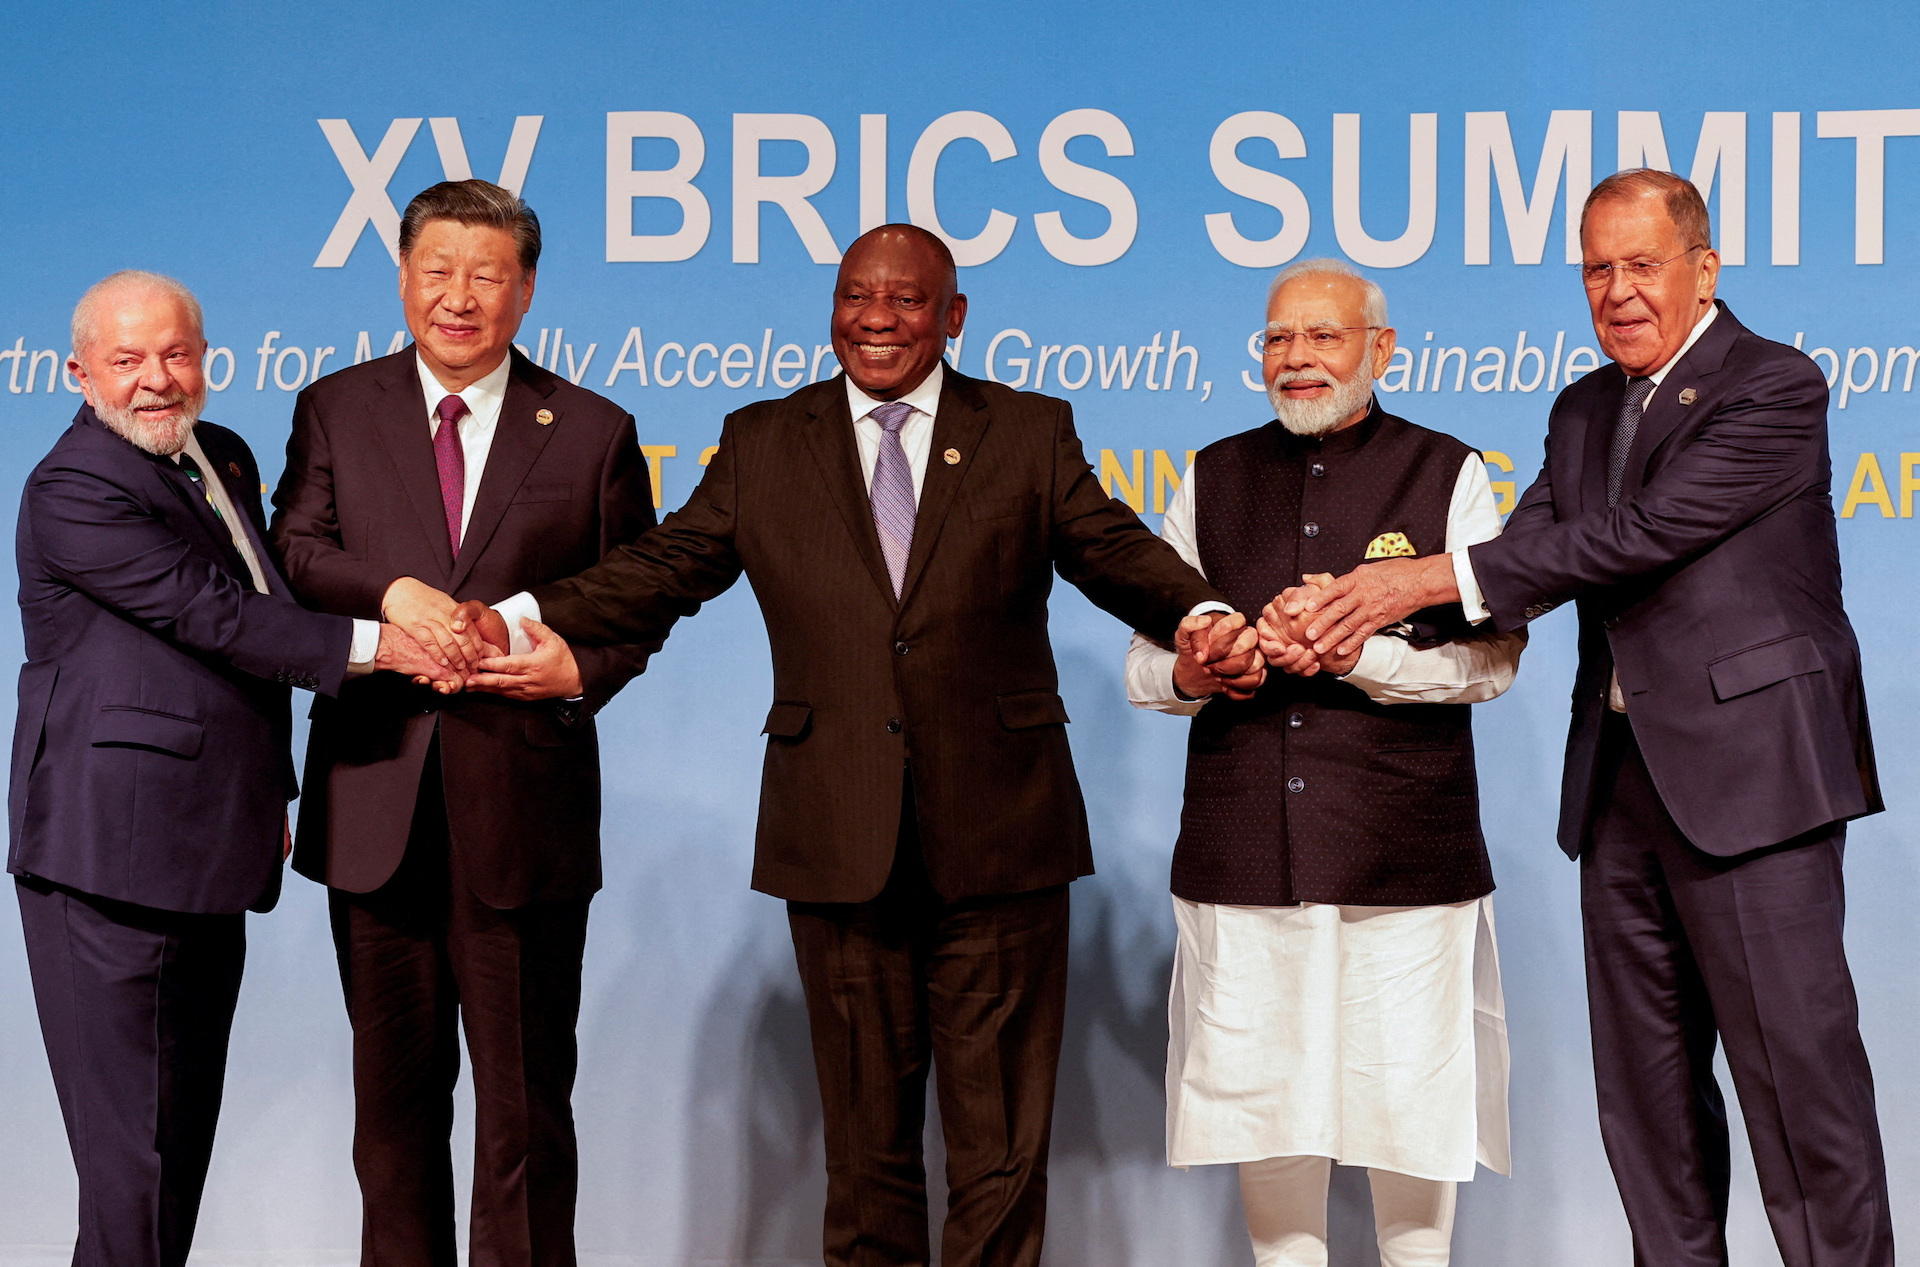 Pro-Russian BRICS narratives in Latin America prospered during summit lead-up